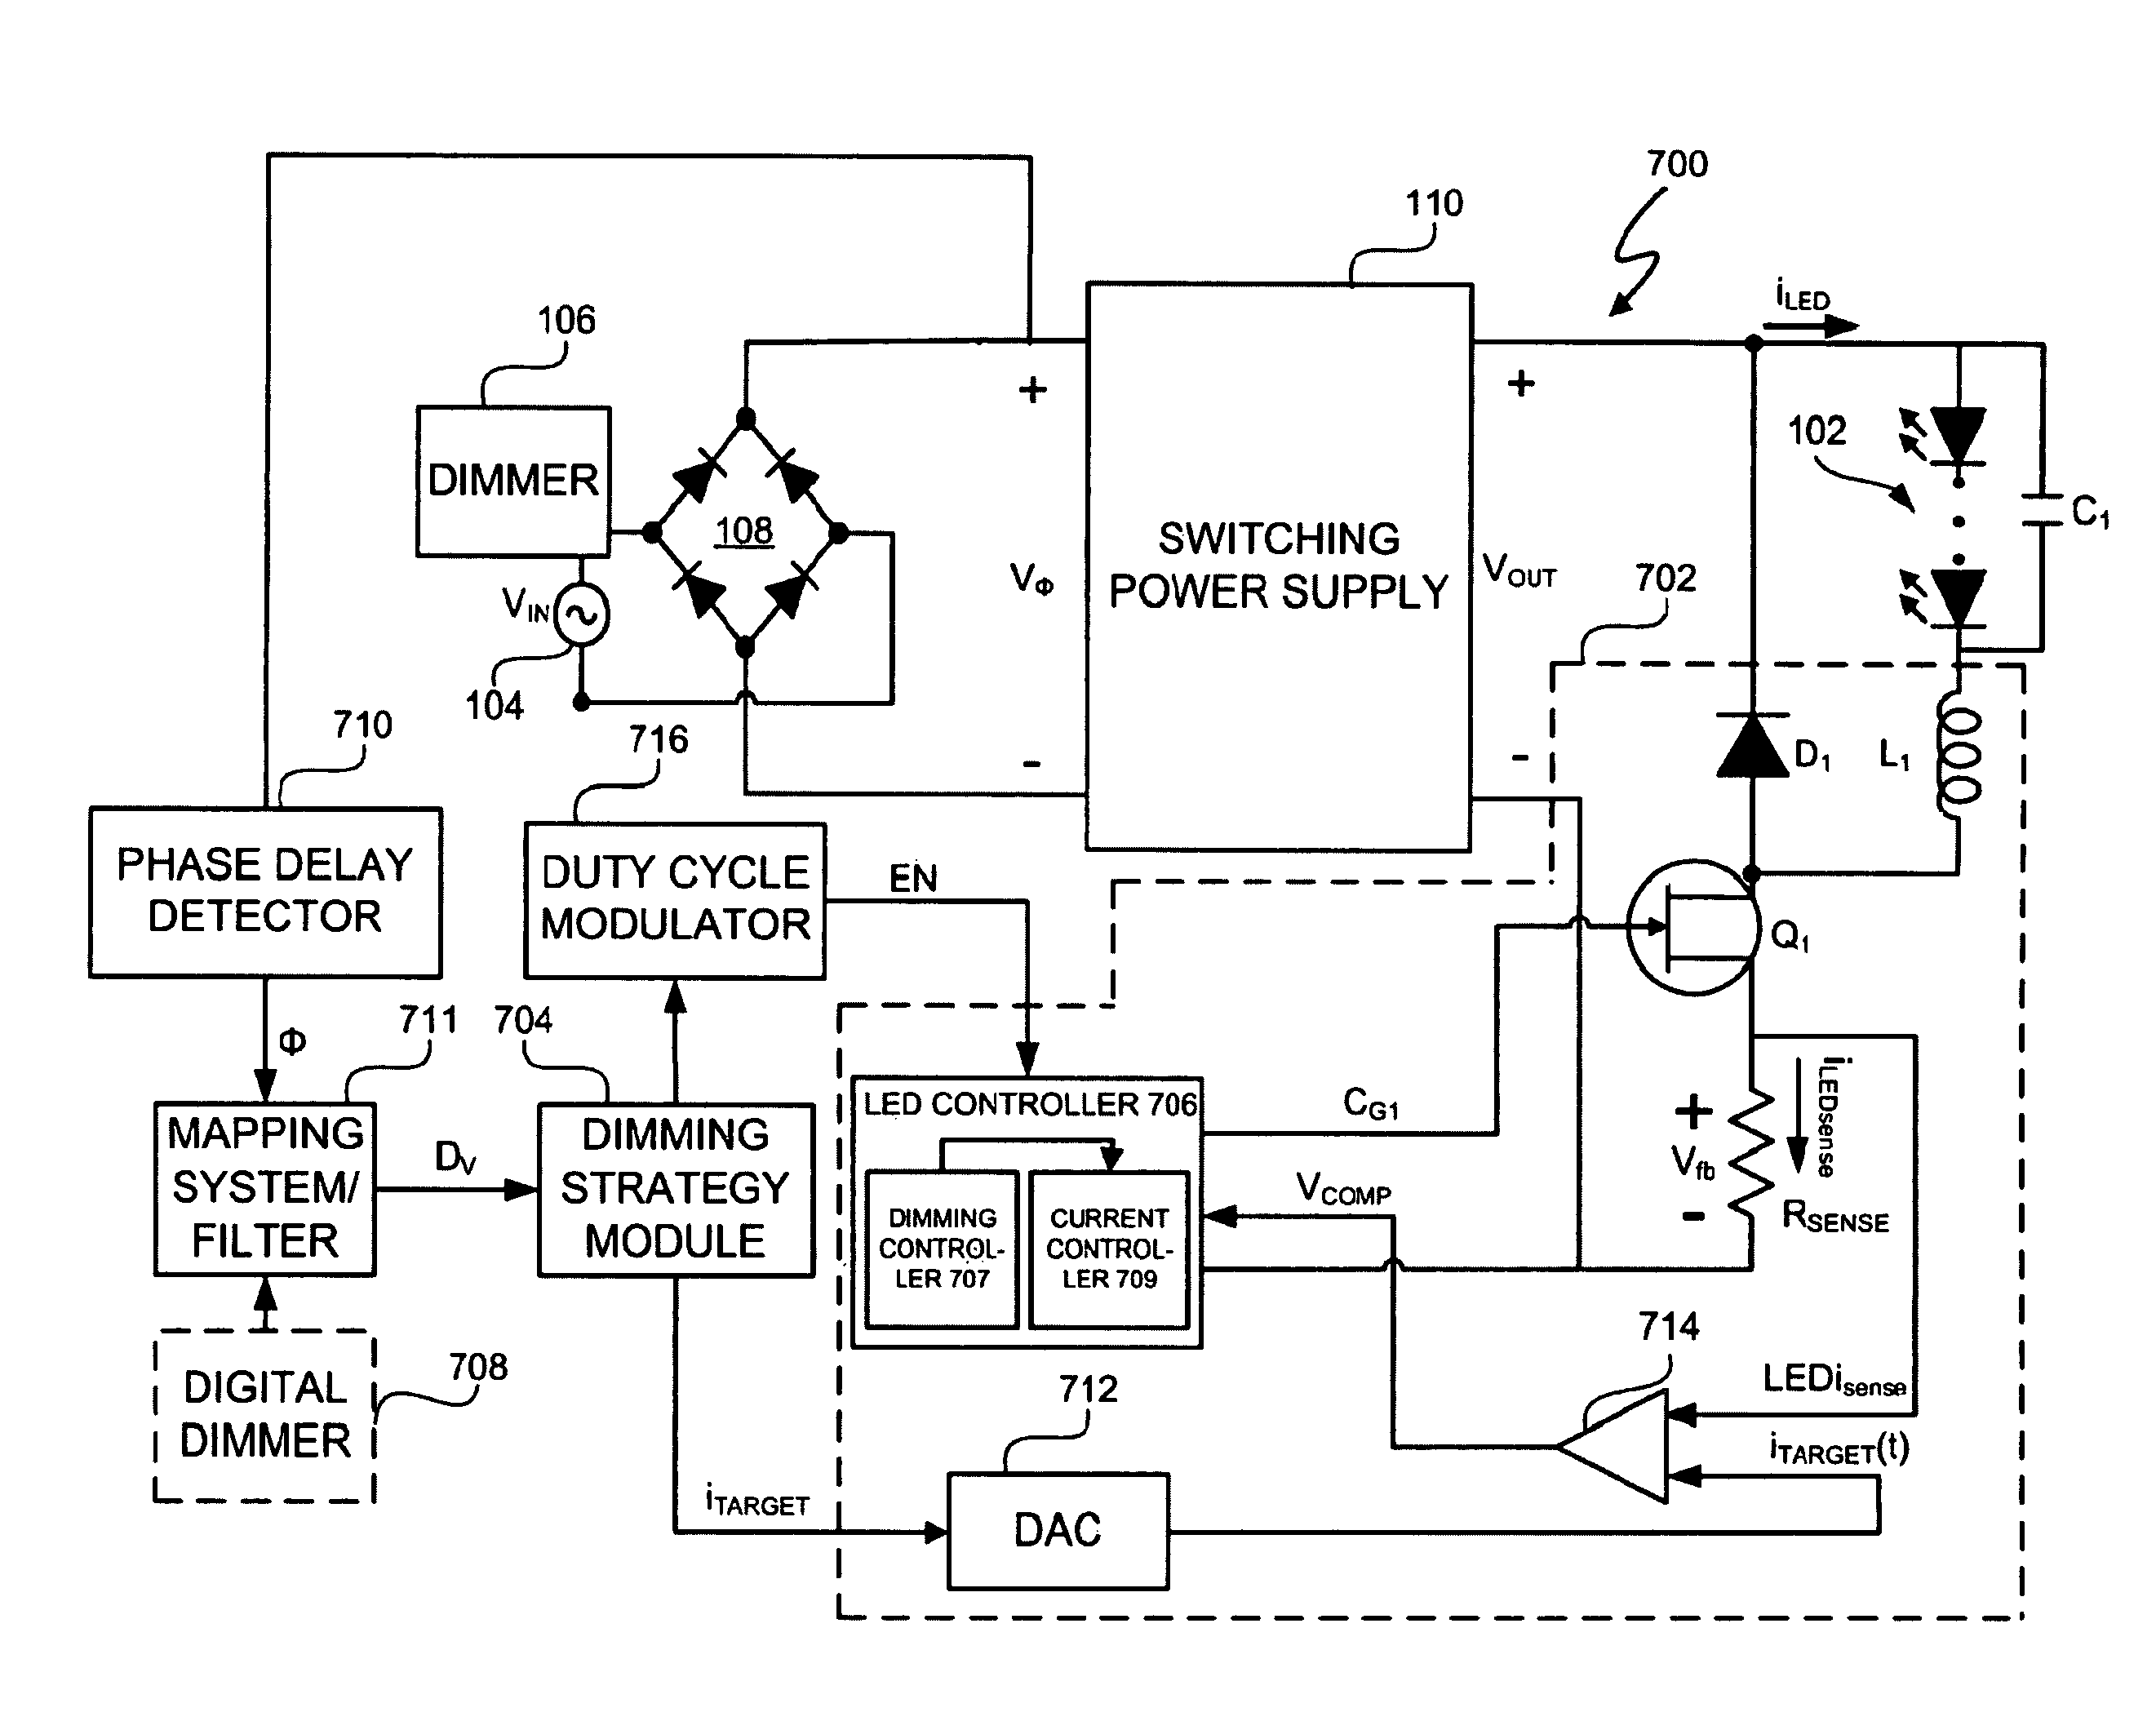 LED lighting system with accurate current control